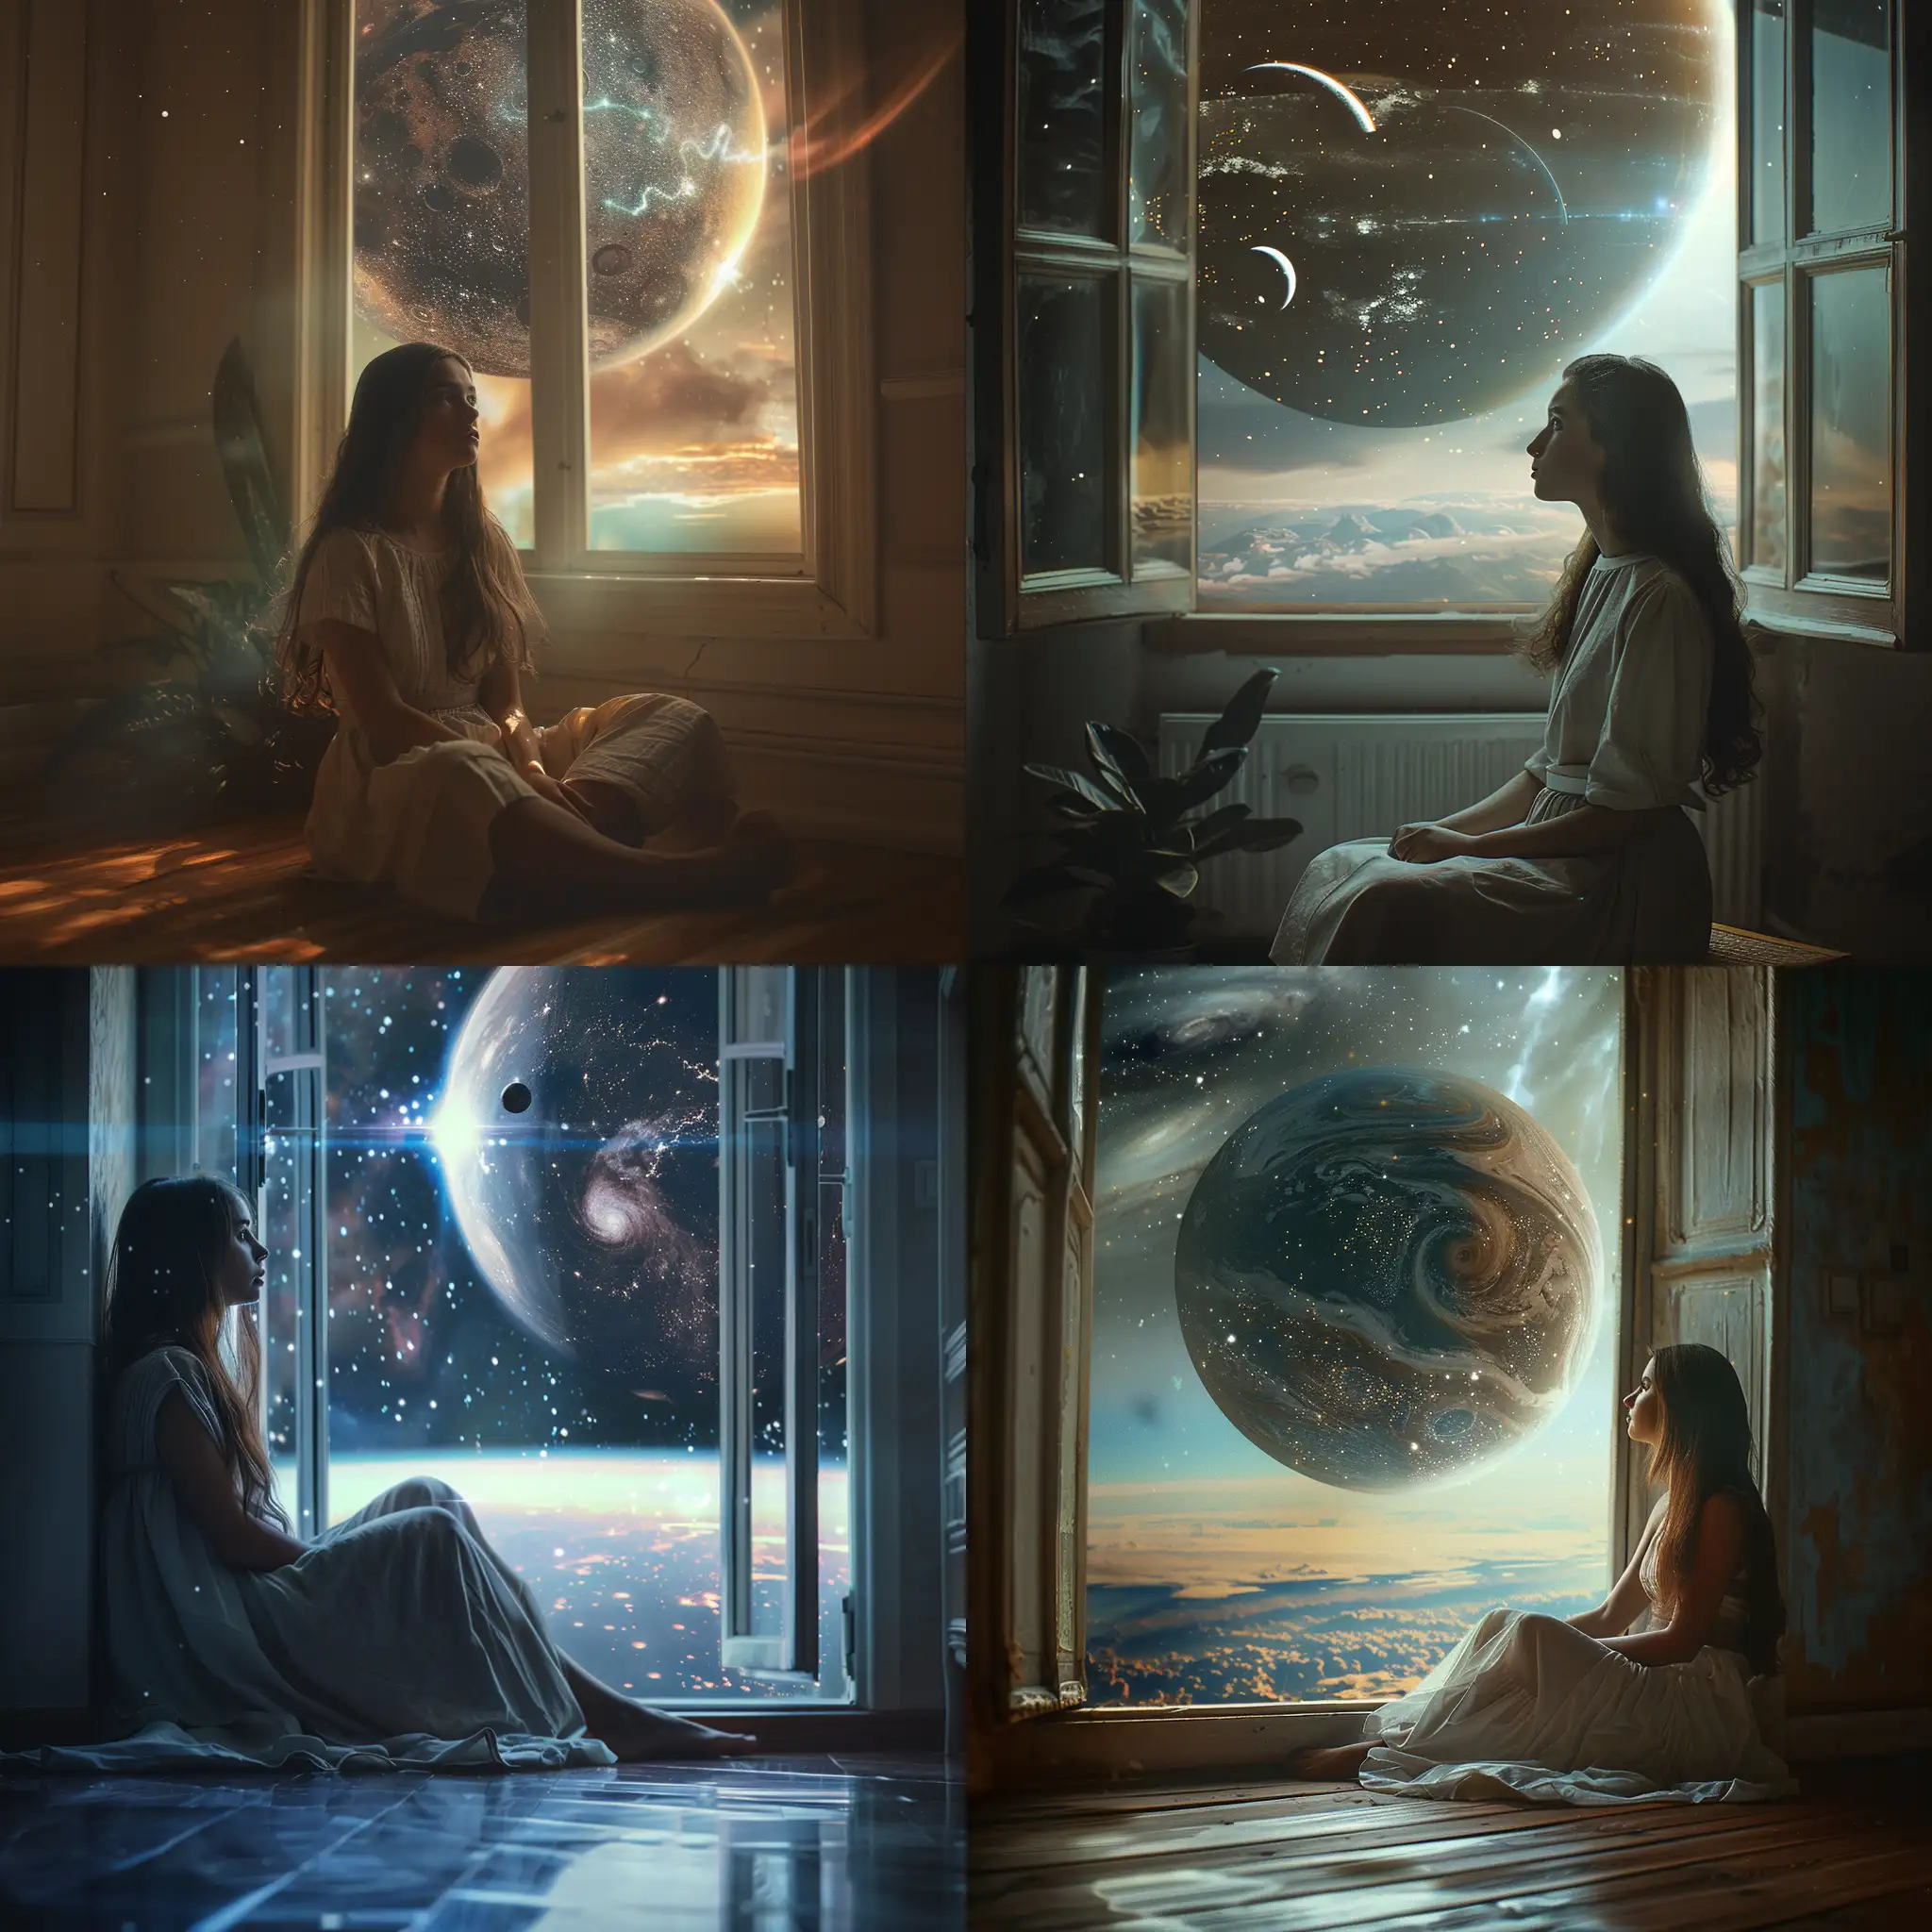 Girl-in-Cosmic-Landscape-with-Open-Window-Star-Wars-Style-Film-Photography